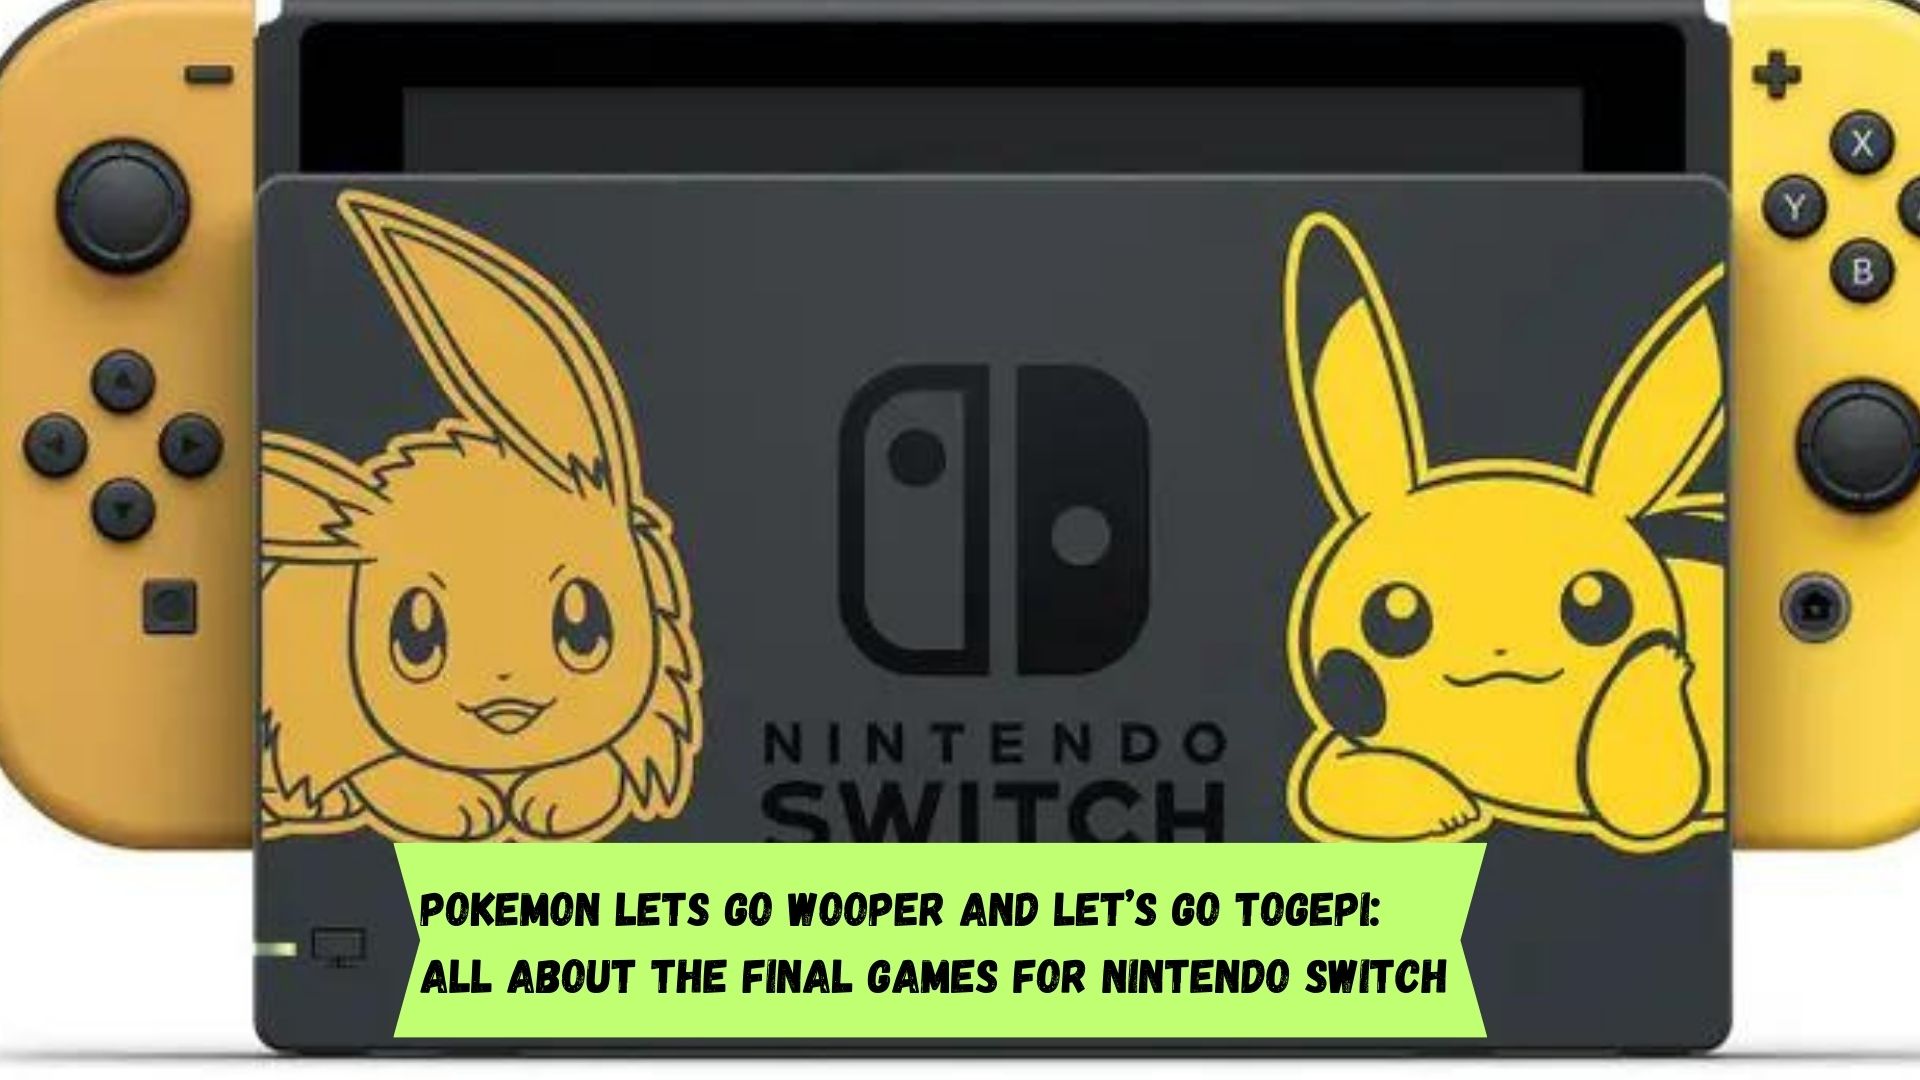 Pokemon Lets Go Wooper and Let’s Go Togepi: All about the final games for Nintendo Switch